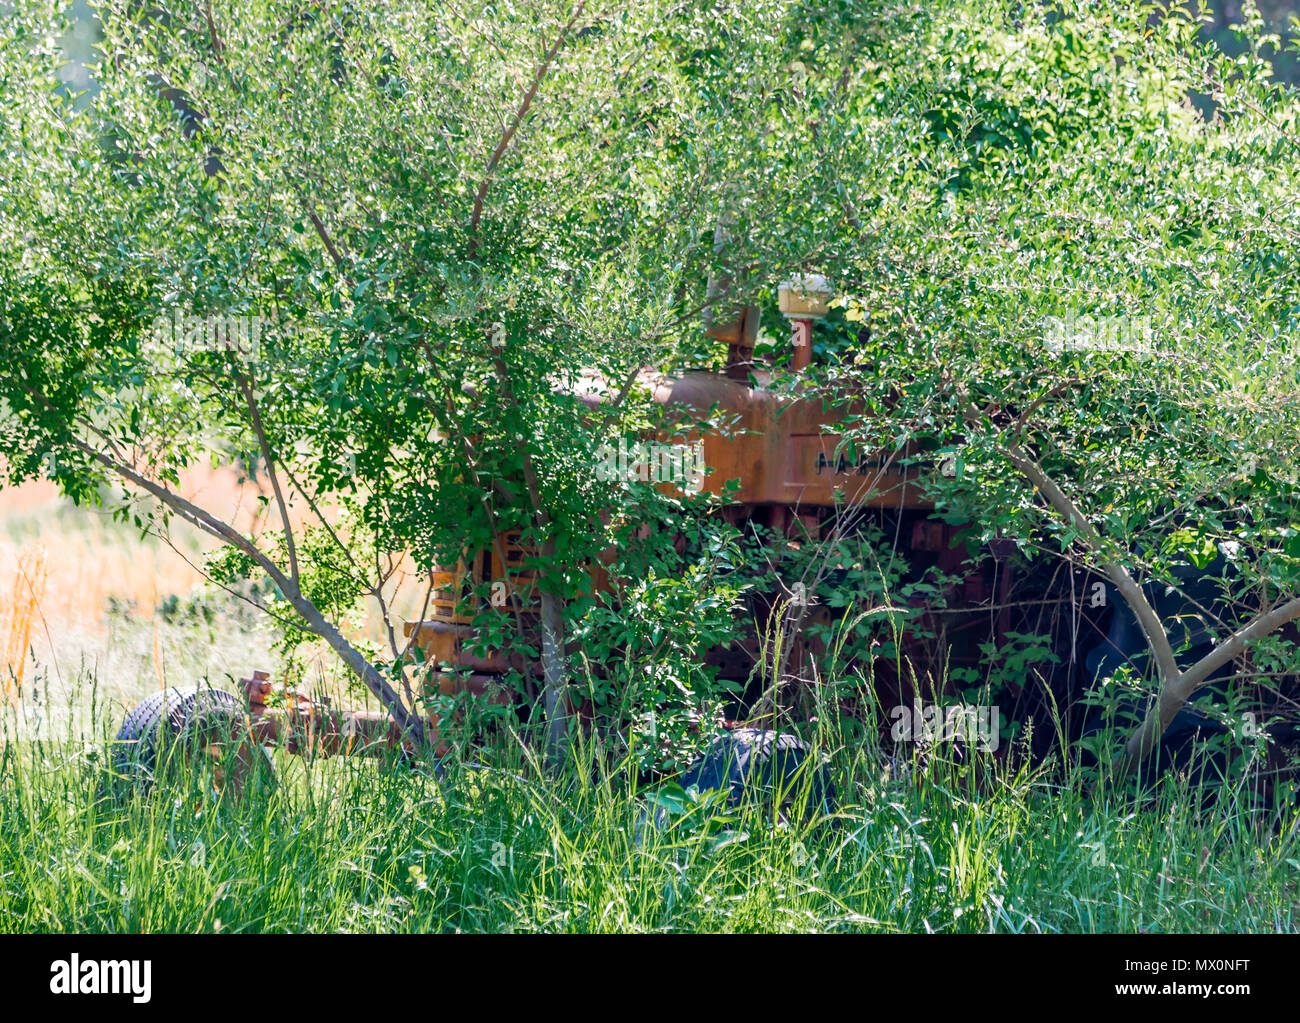 An old abandoned farm tractor overtaken by weeds and trees Stock Photo